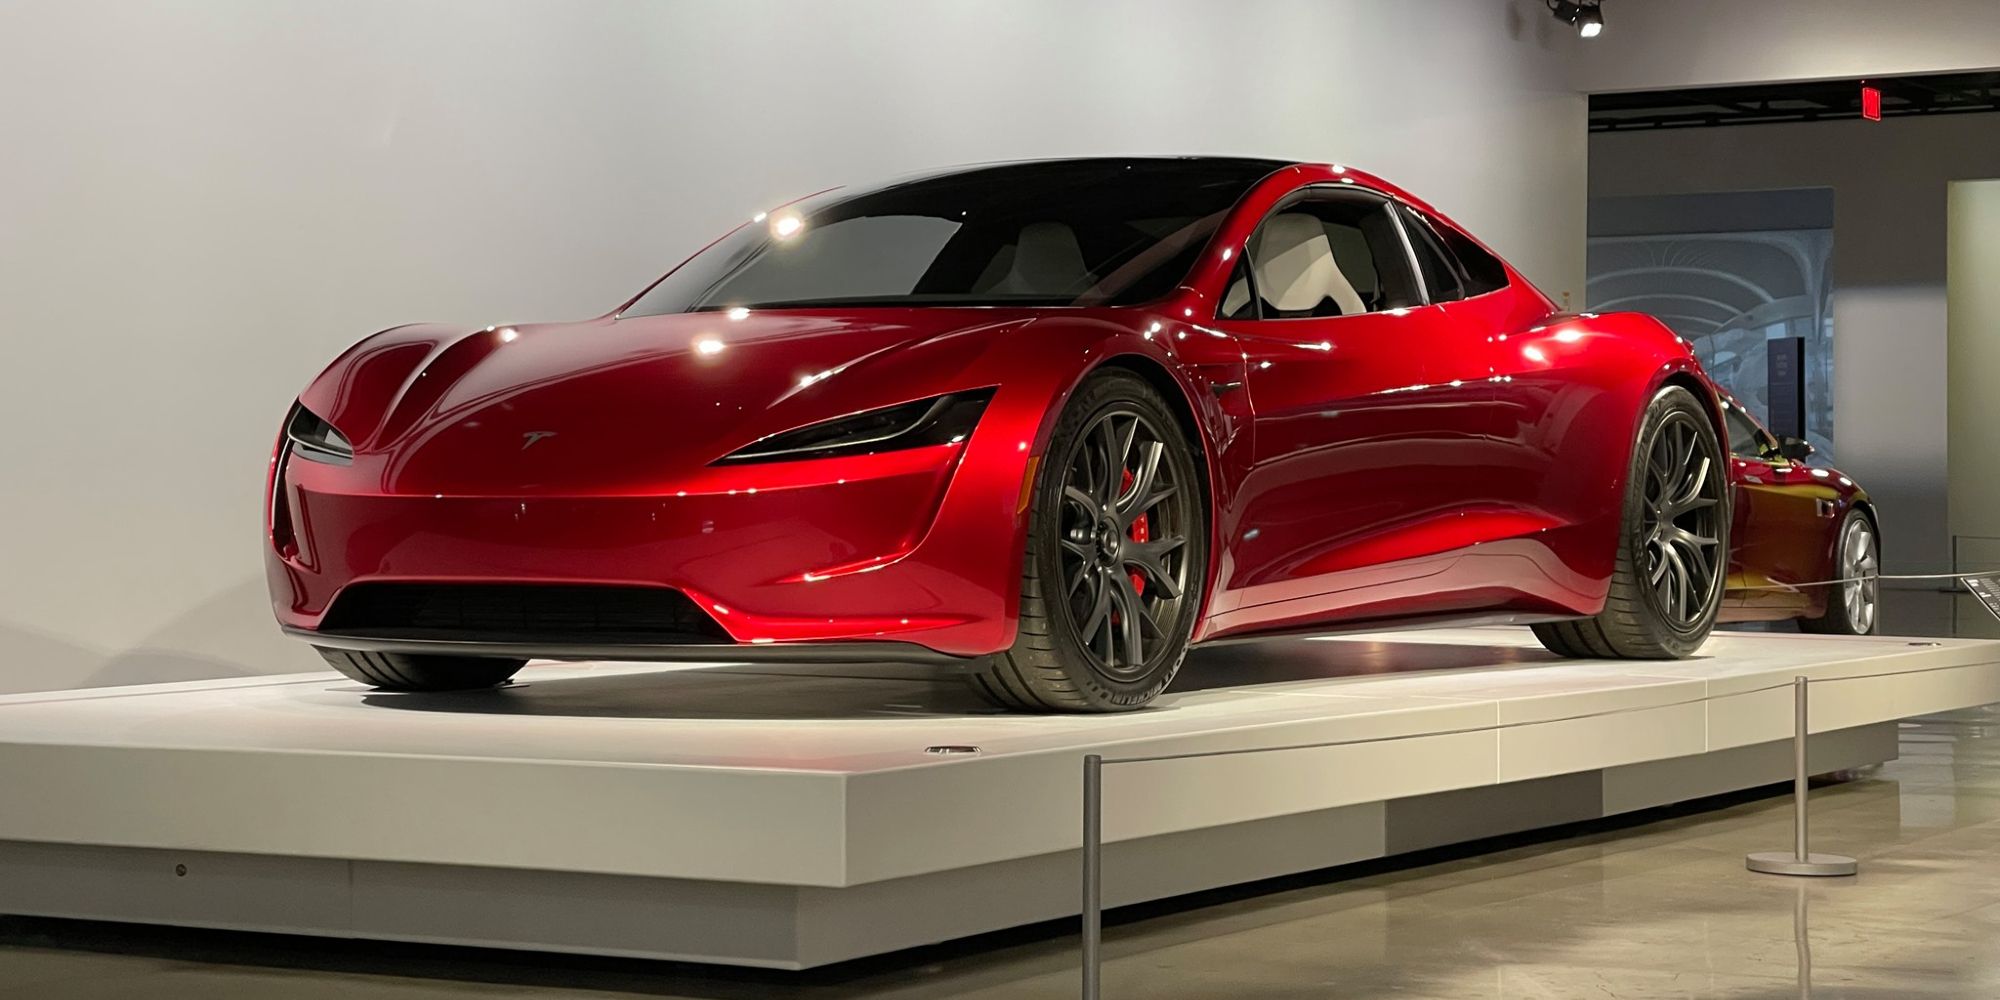 New Tesla Roadster Will Have Mind-Bending Acceleration & “Be Able To Fly”